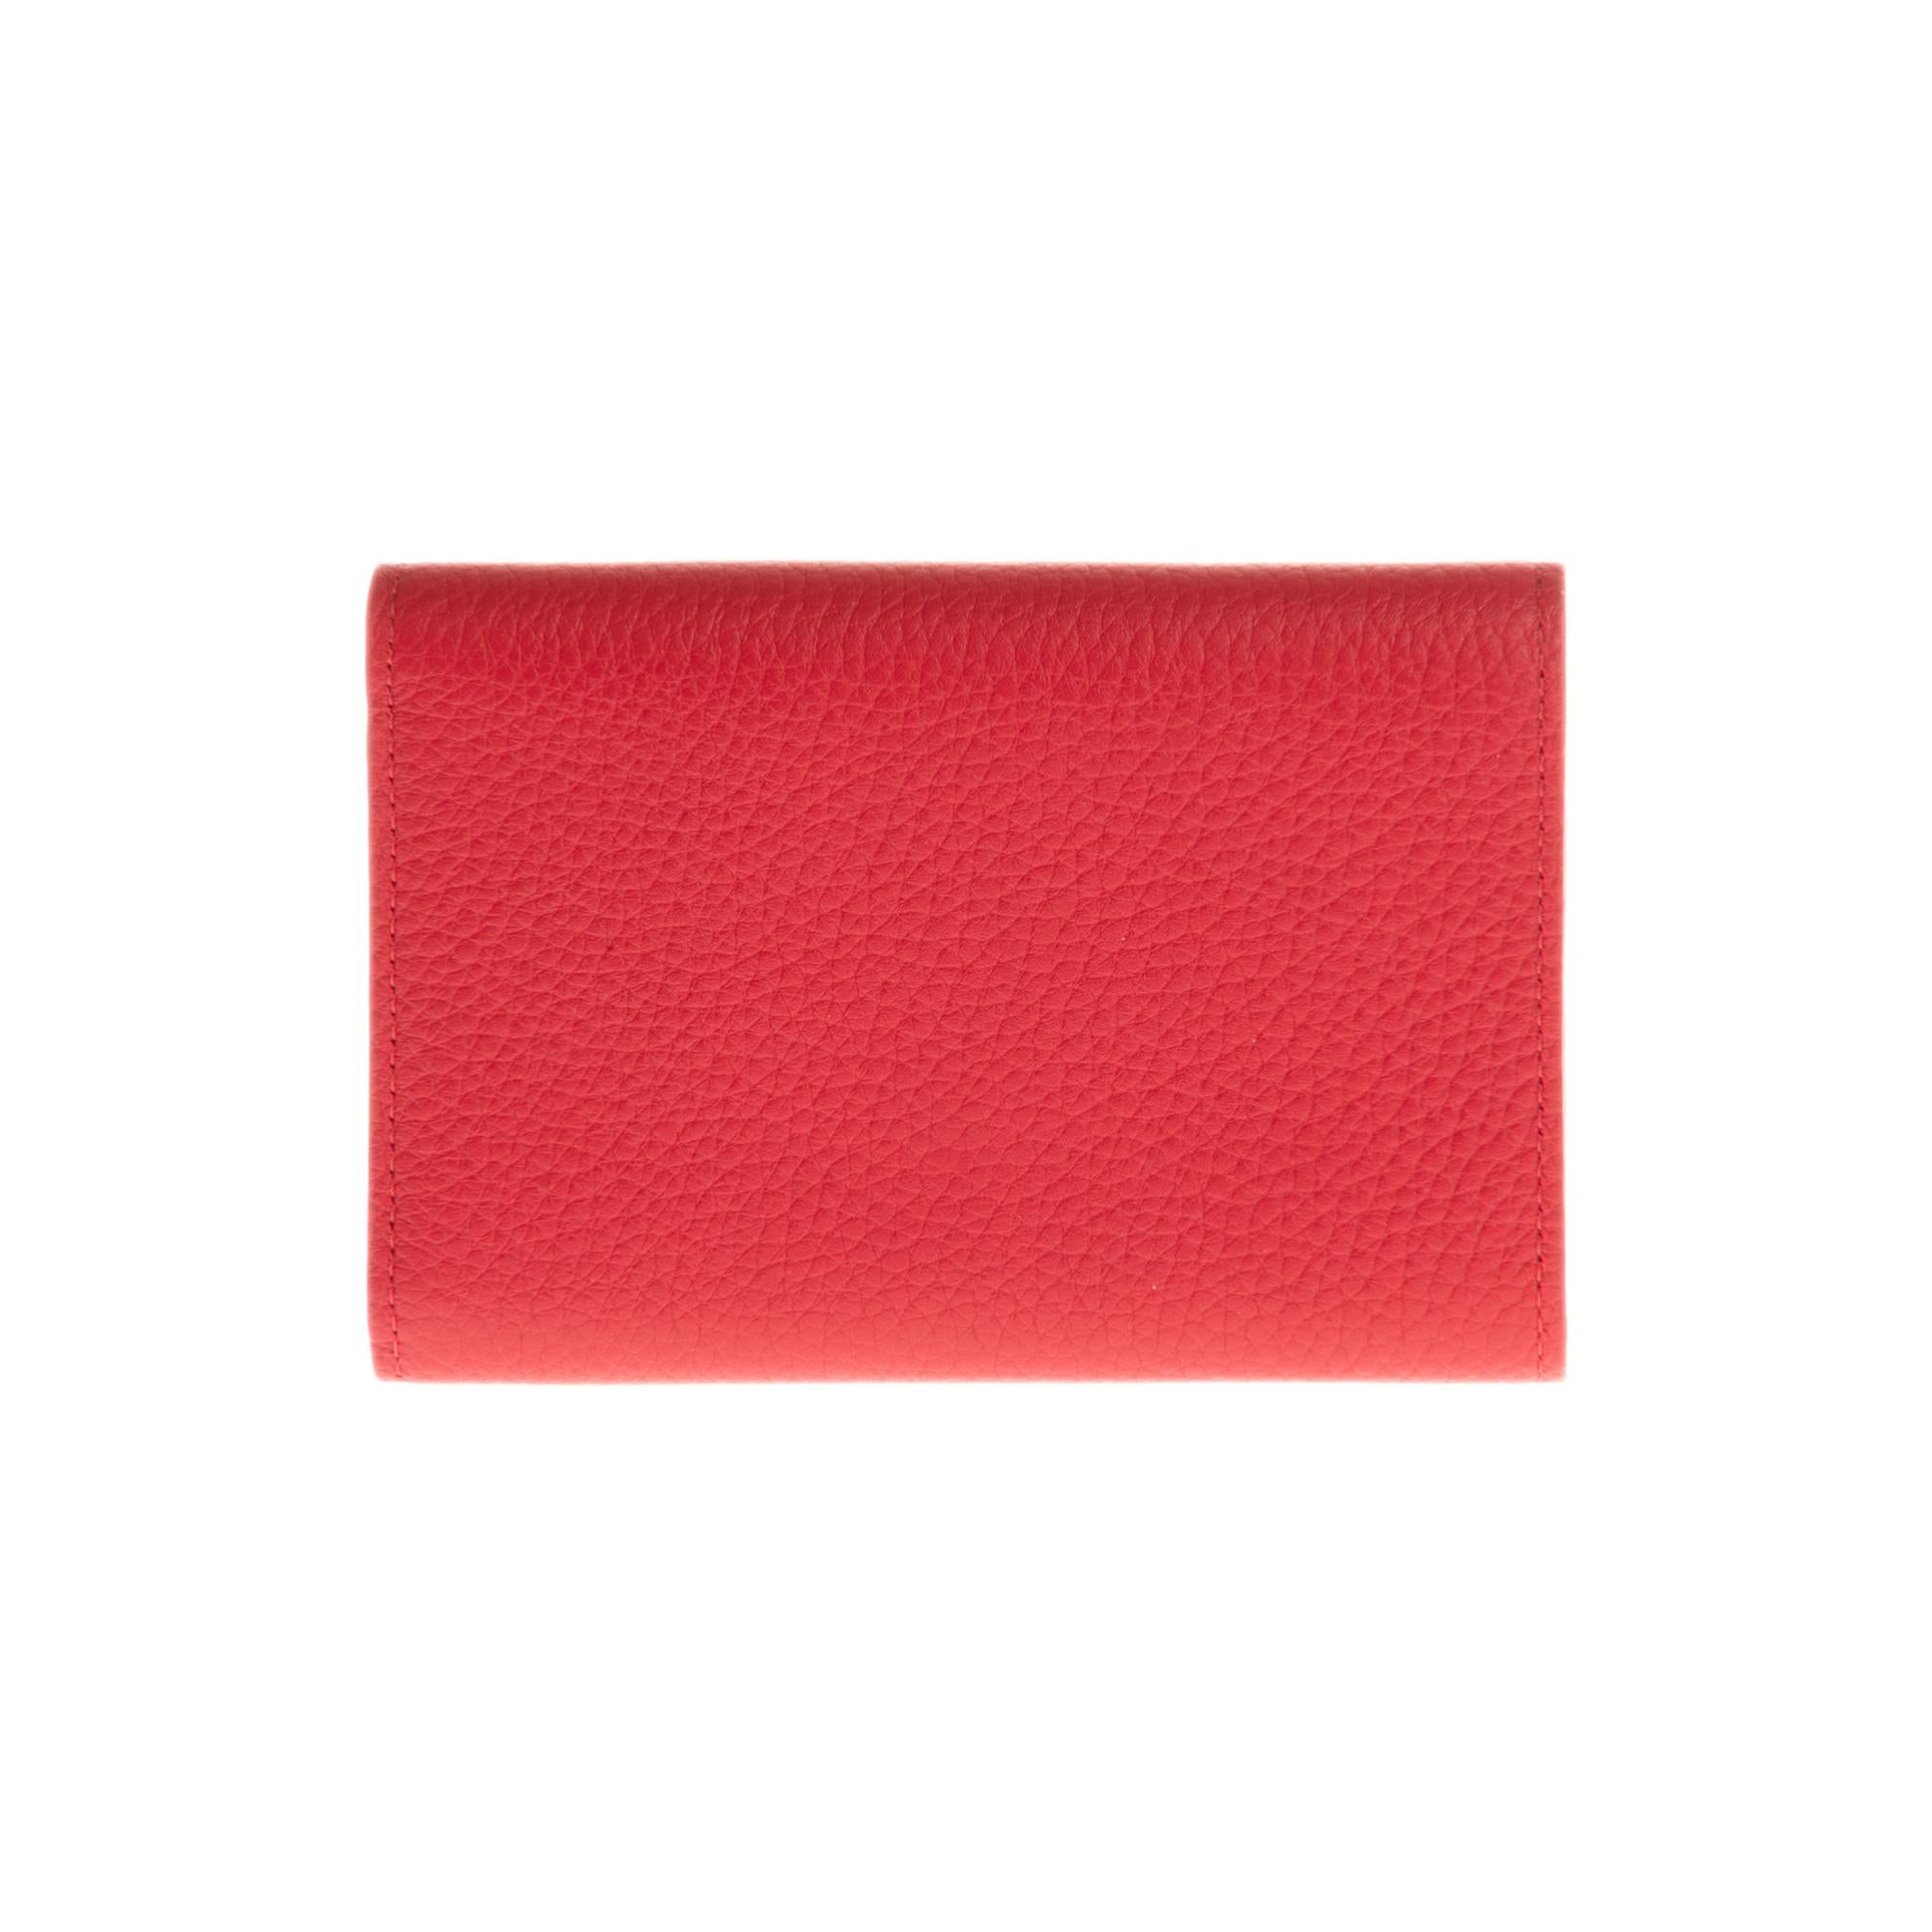 The Capucines Compact wallet in soft red scarlet Taurillon leather is very practical. Its generous size is ideal for carrying the essentials of everyday life. This elegant version is both well designed and original. With two flaps, it can hold